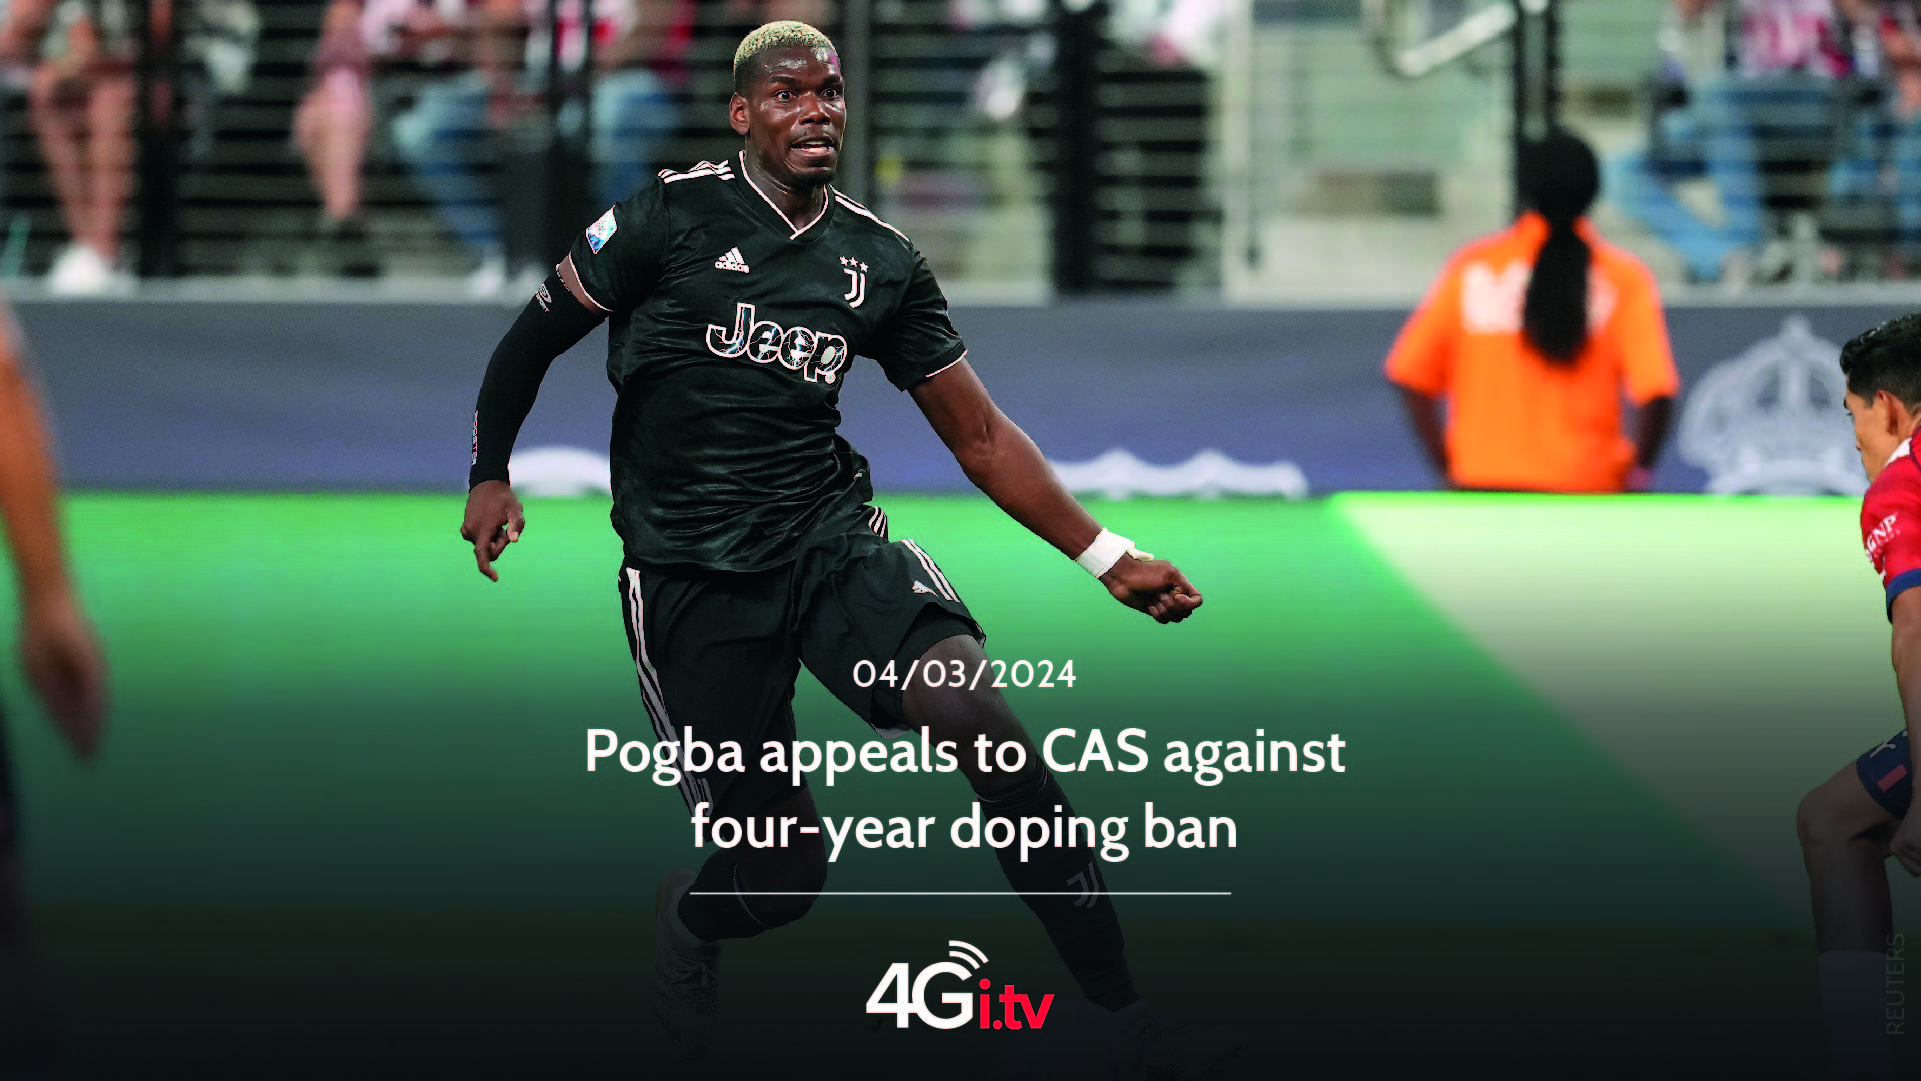 Подробнее о статье Pogba appeals to CAS against four-year doping ban